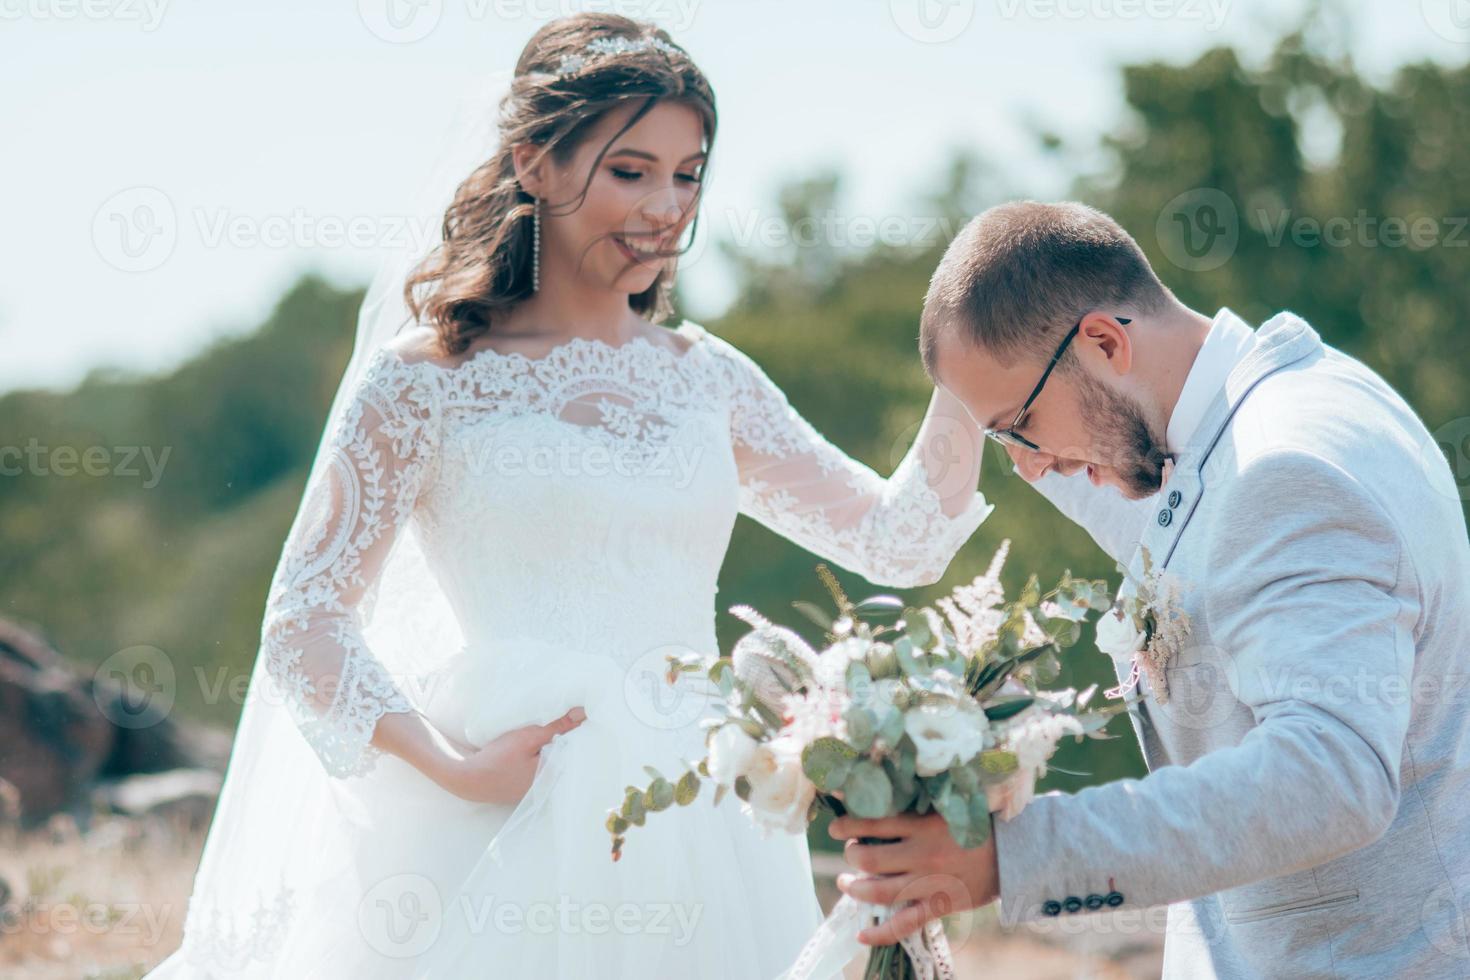 Wedding photo of the bride and groom in a gray pink color on nature in the forest and rocks